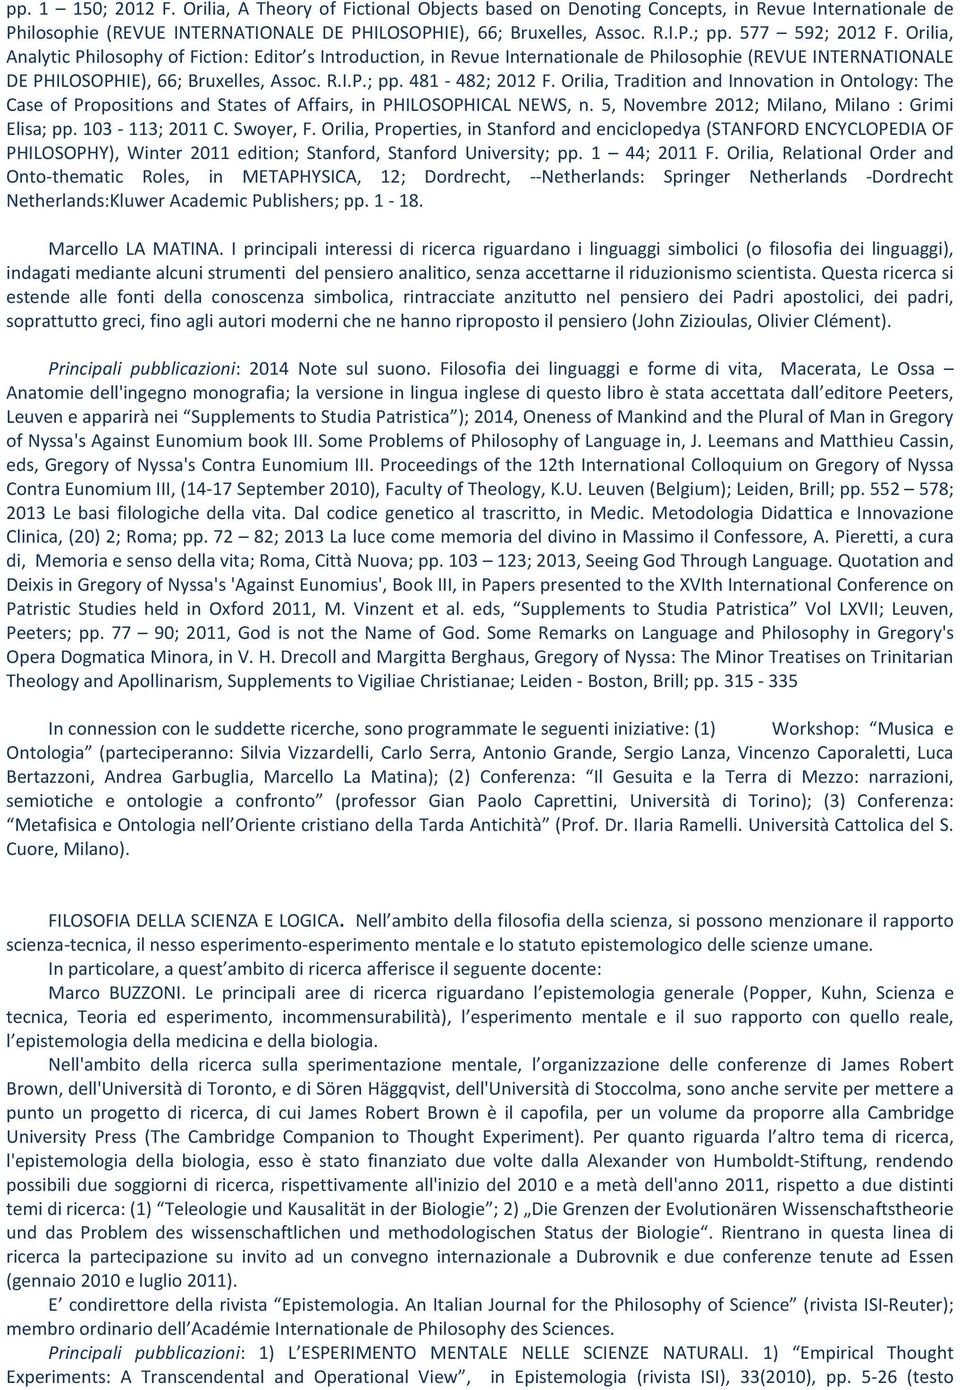 481-482; 2012 F. Orilia, Tradition and Innovation in Ontology: The Case of Propositions and States of Affairs, in PHILOSOPHICAL NEWS, n. 5, Novembre 2012; Milano, Milano : Grimi Elisa; pp.